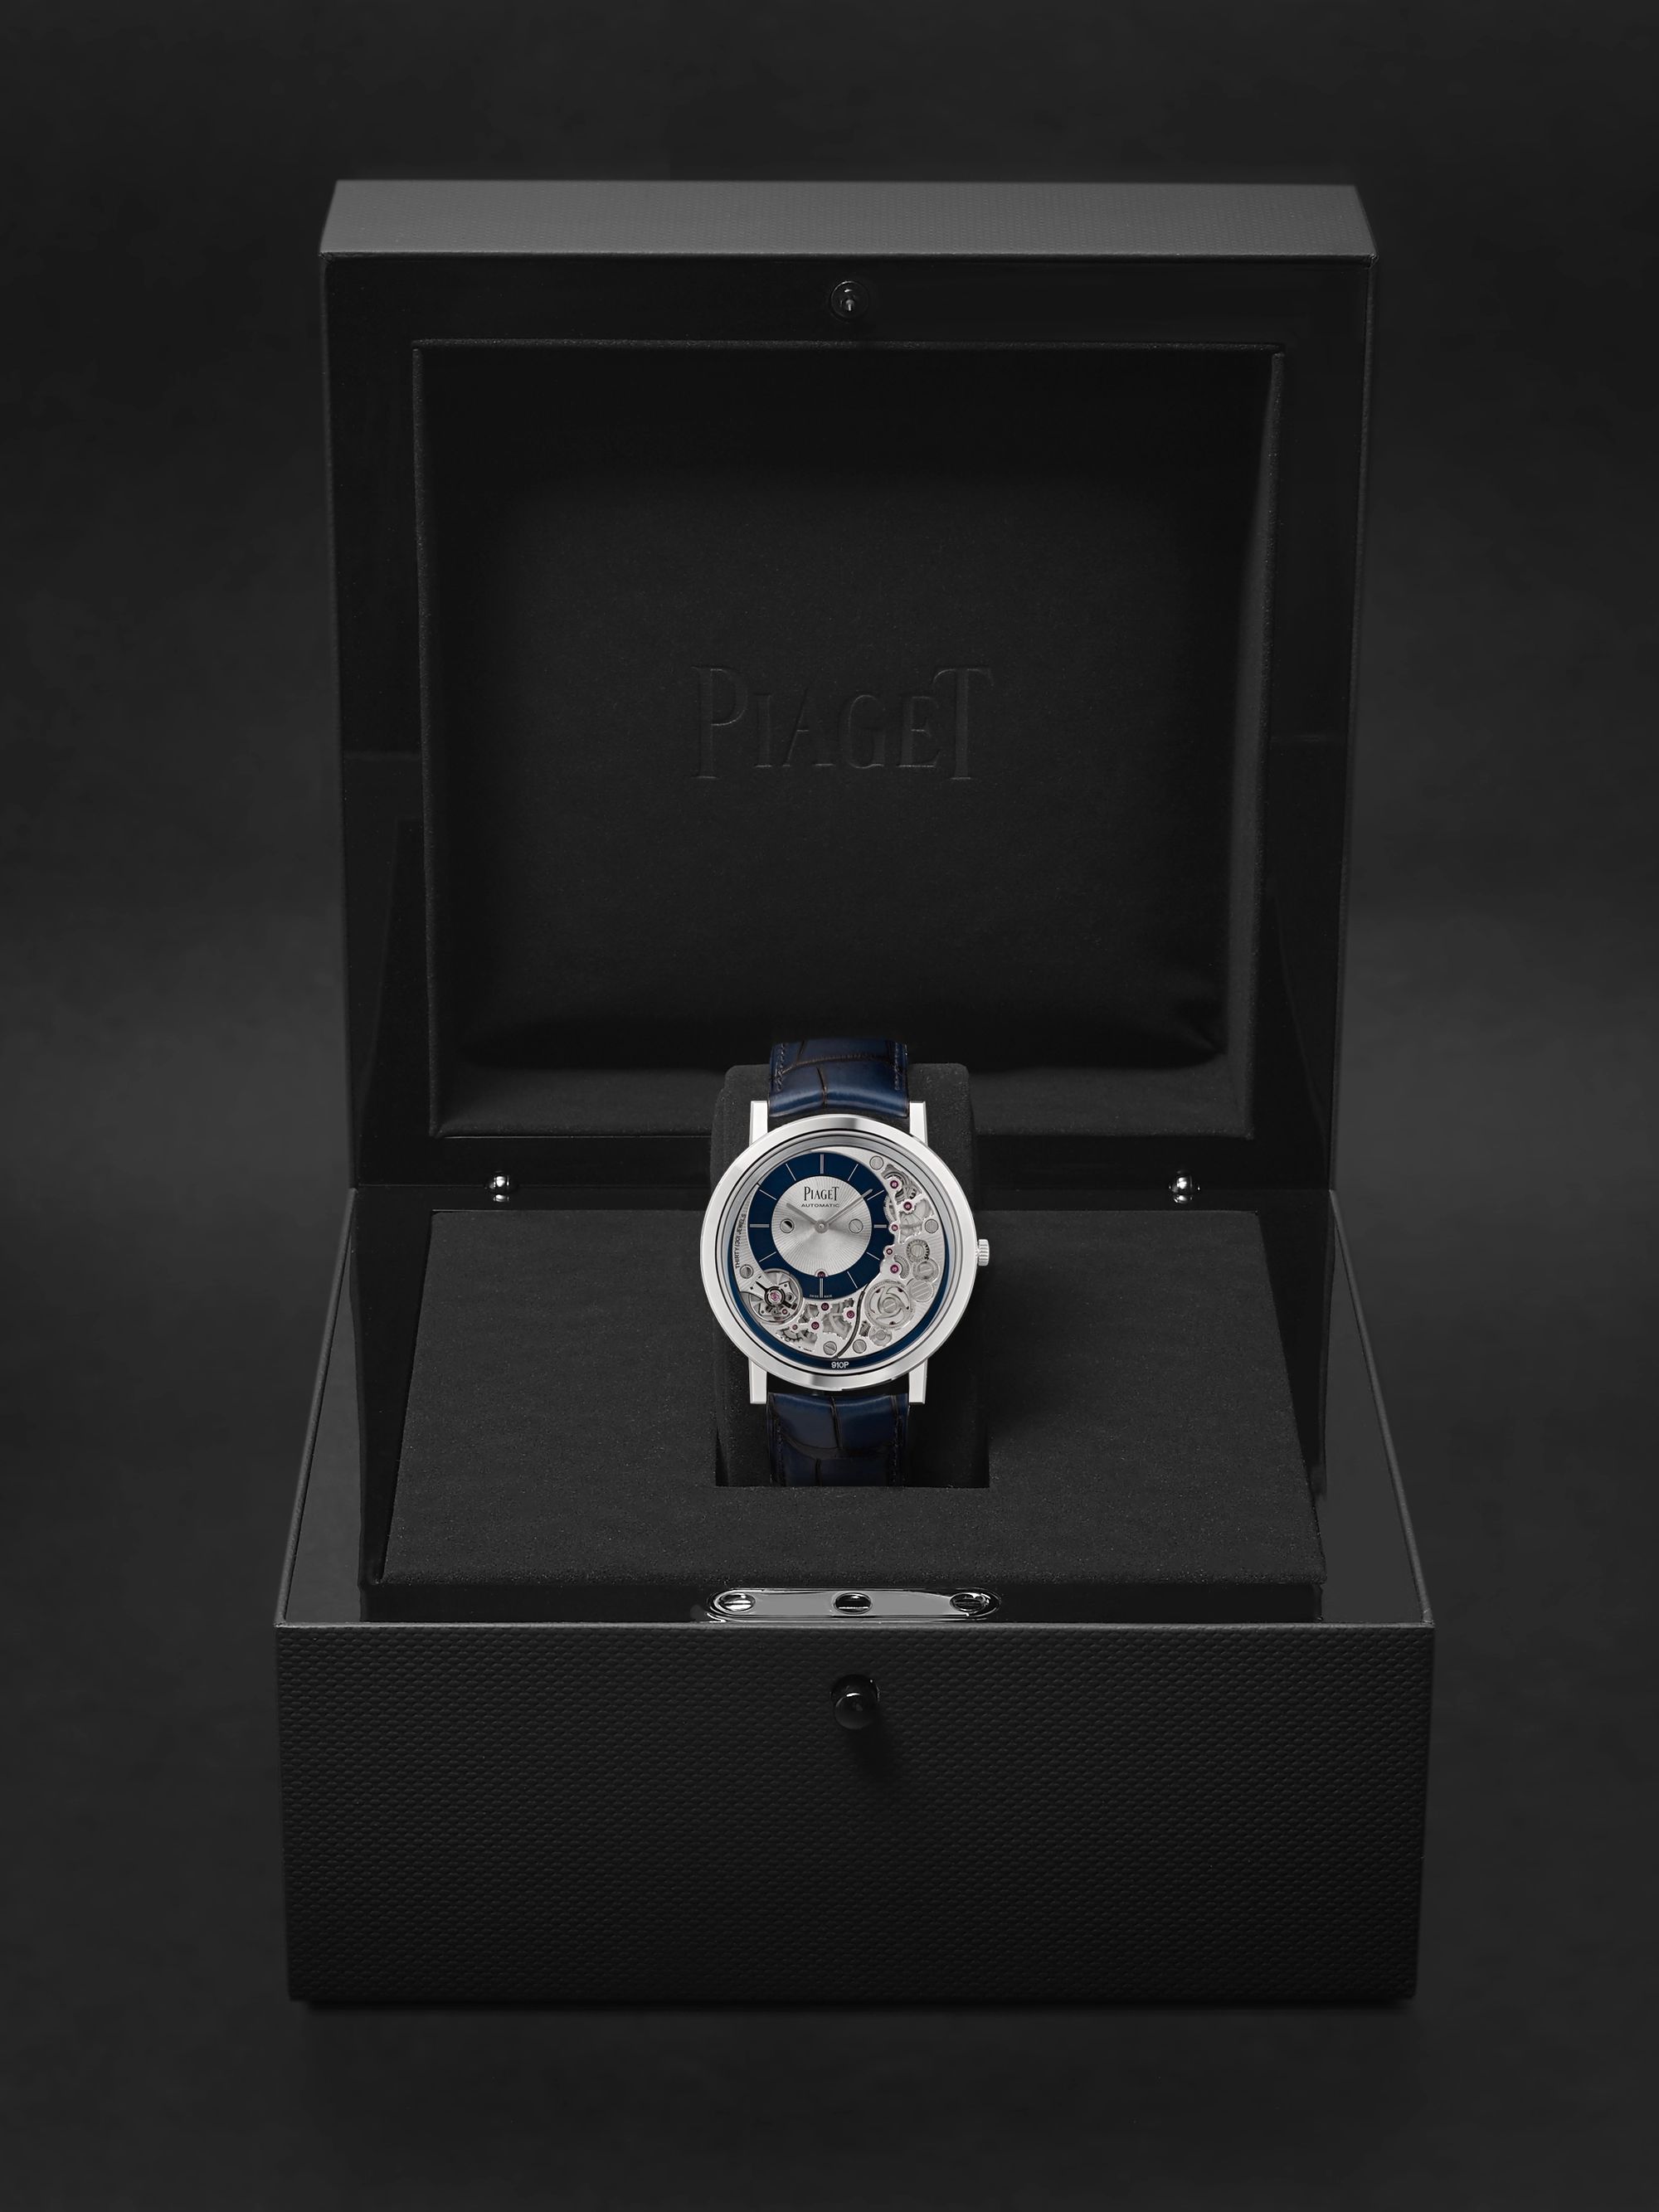 PIAGET Altiplano Ultimate Automatic 41mm 18-Karat White Gold and Alligator Watch, Ref. No. G0A45123